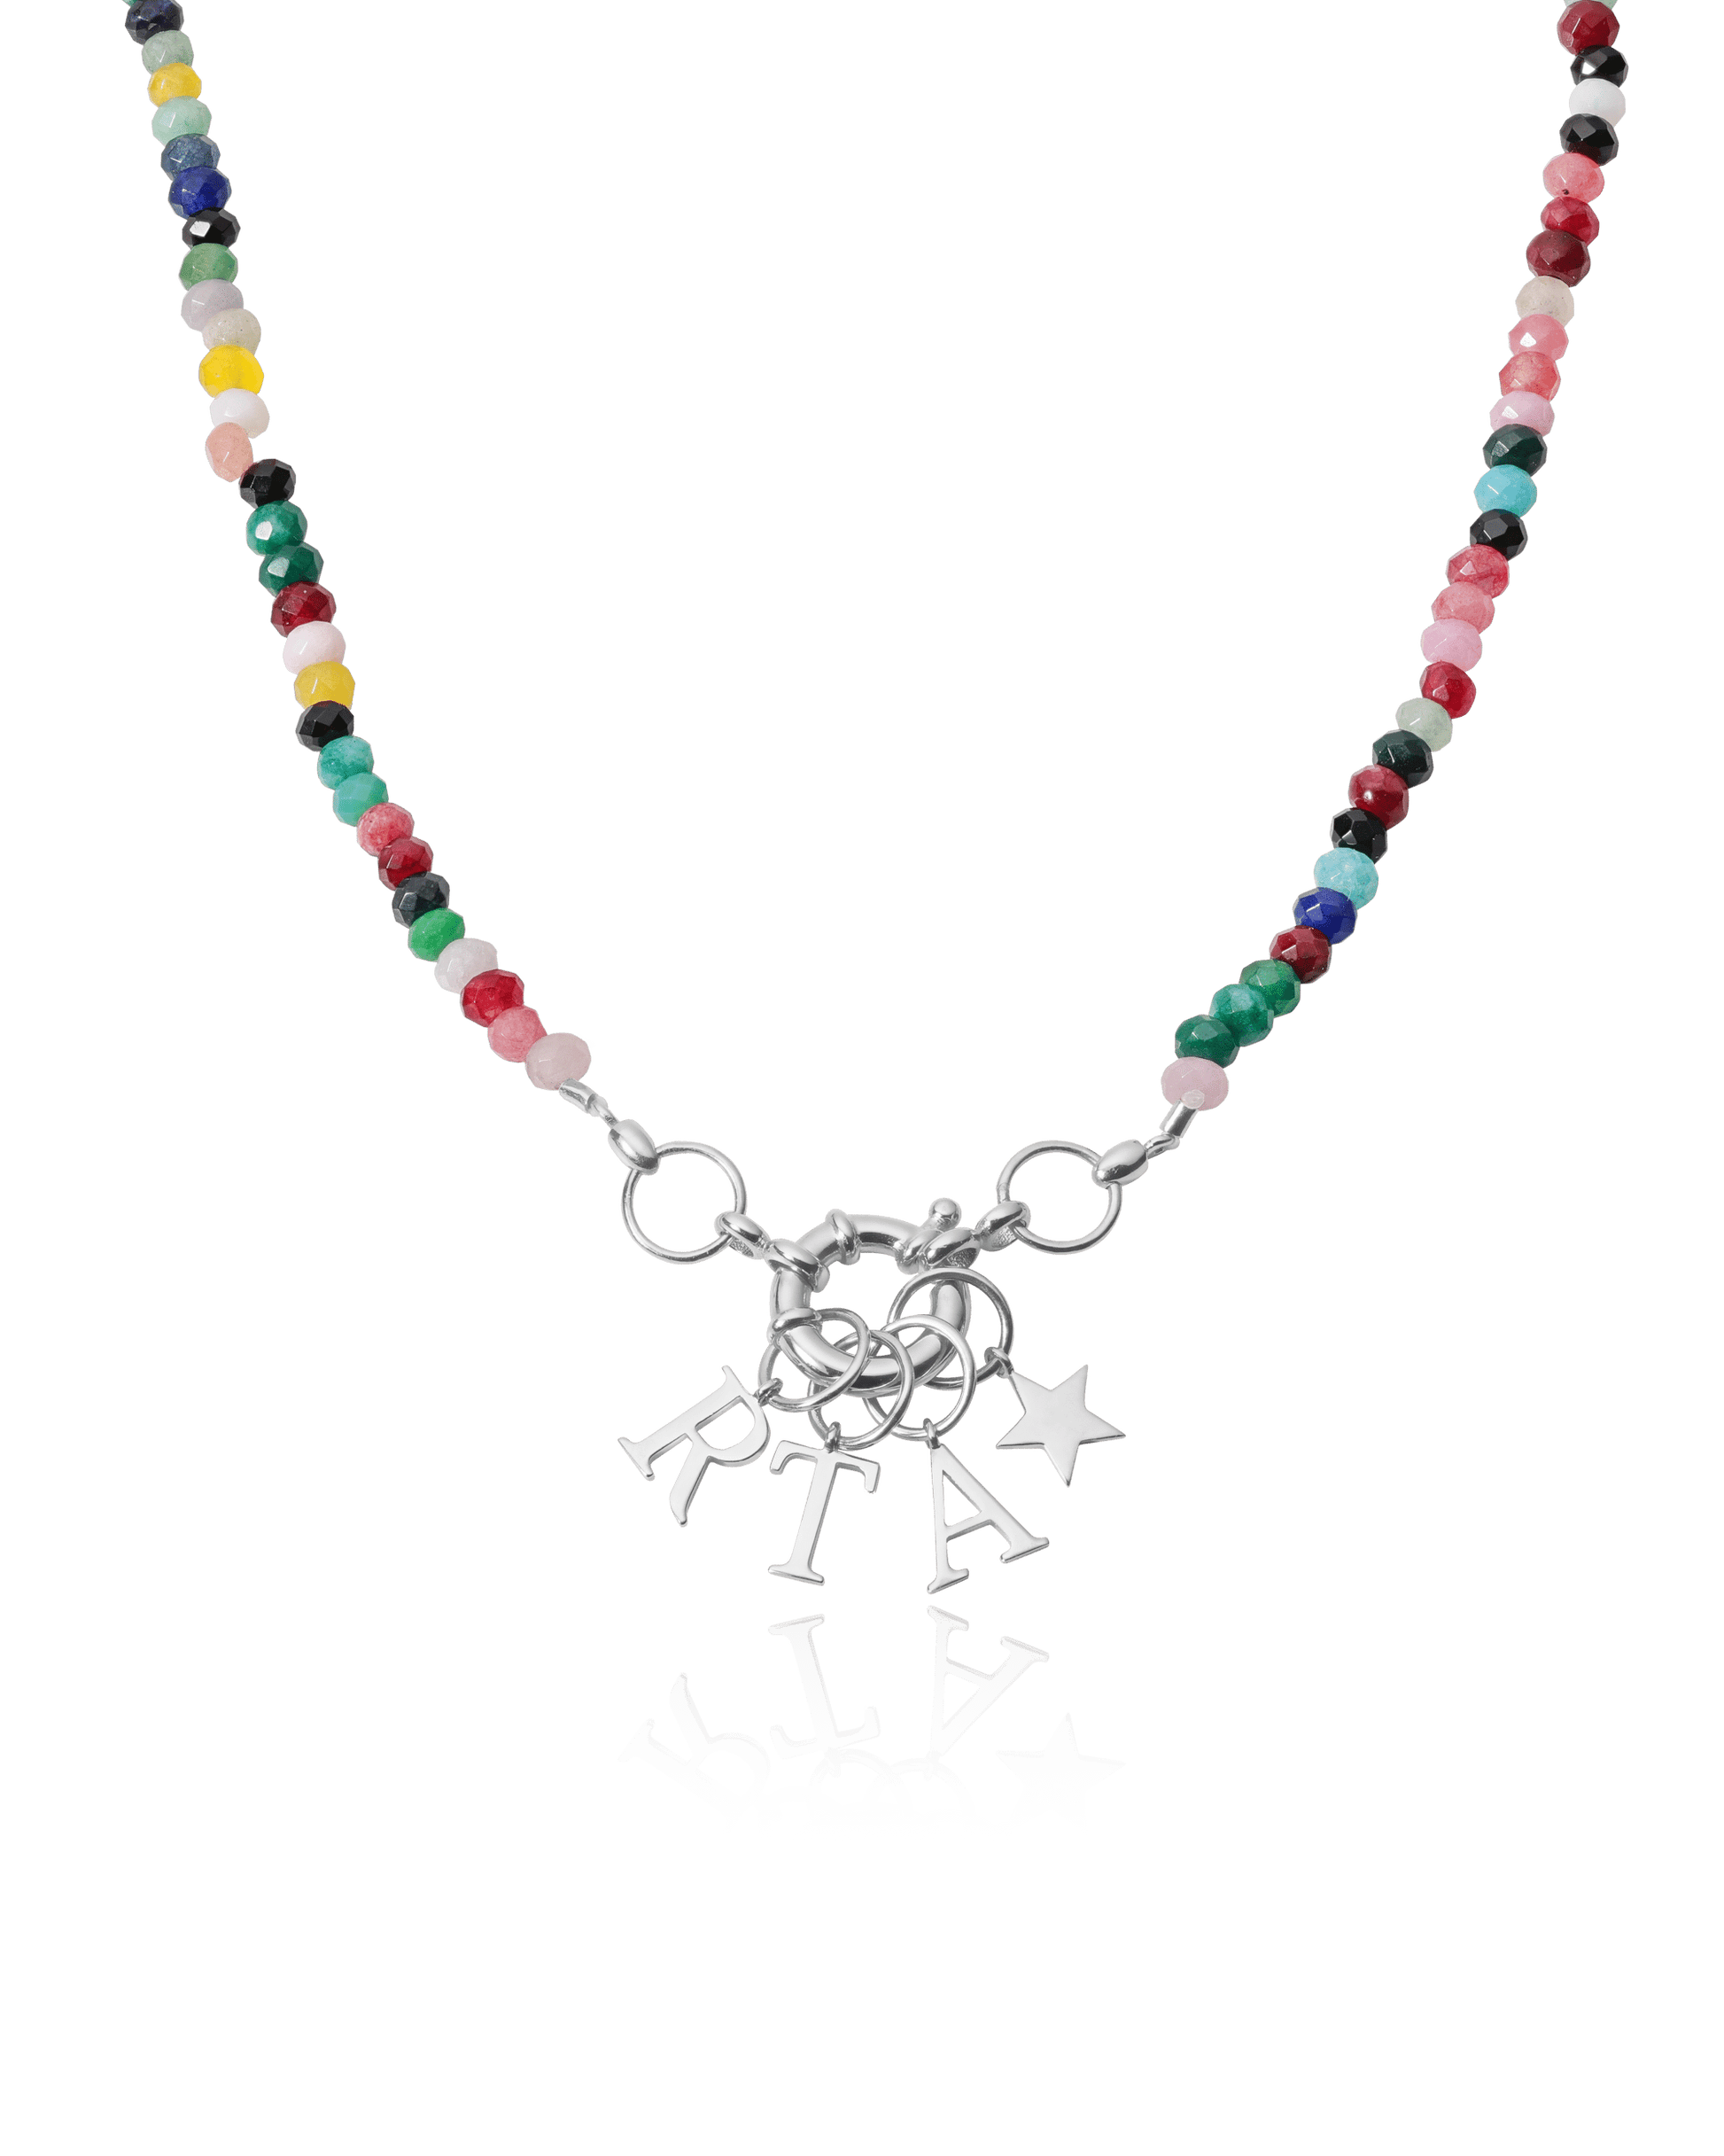 Green Jade Charm Lock Necklace - 925 Sterling Silver Necklaces magal-dev Colorful Jade Gemstones 1 Charm 16"